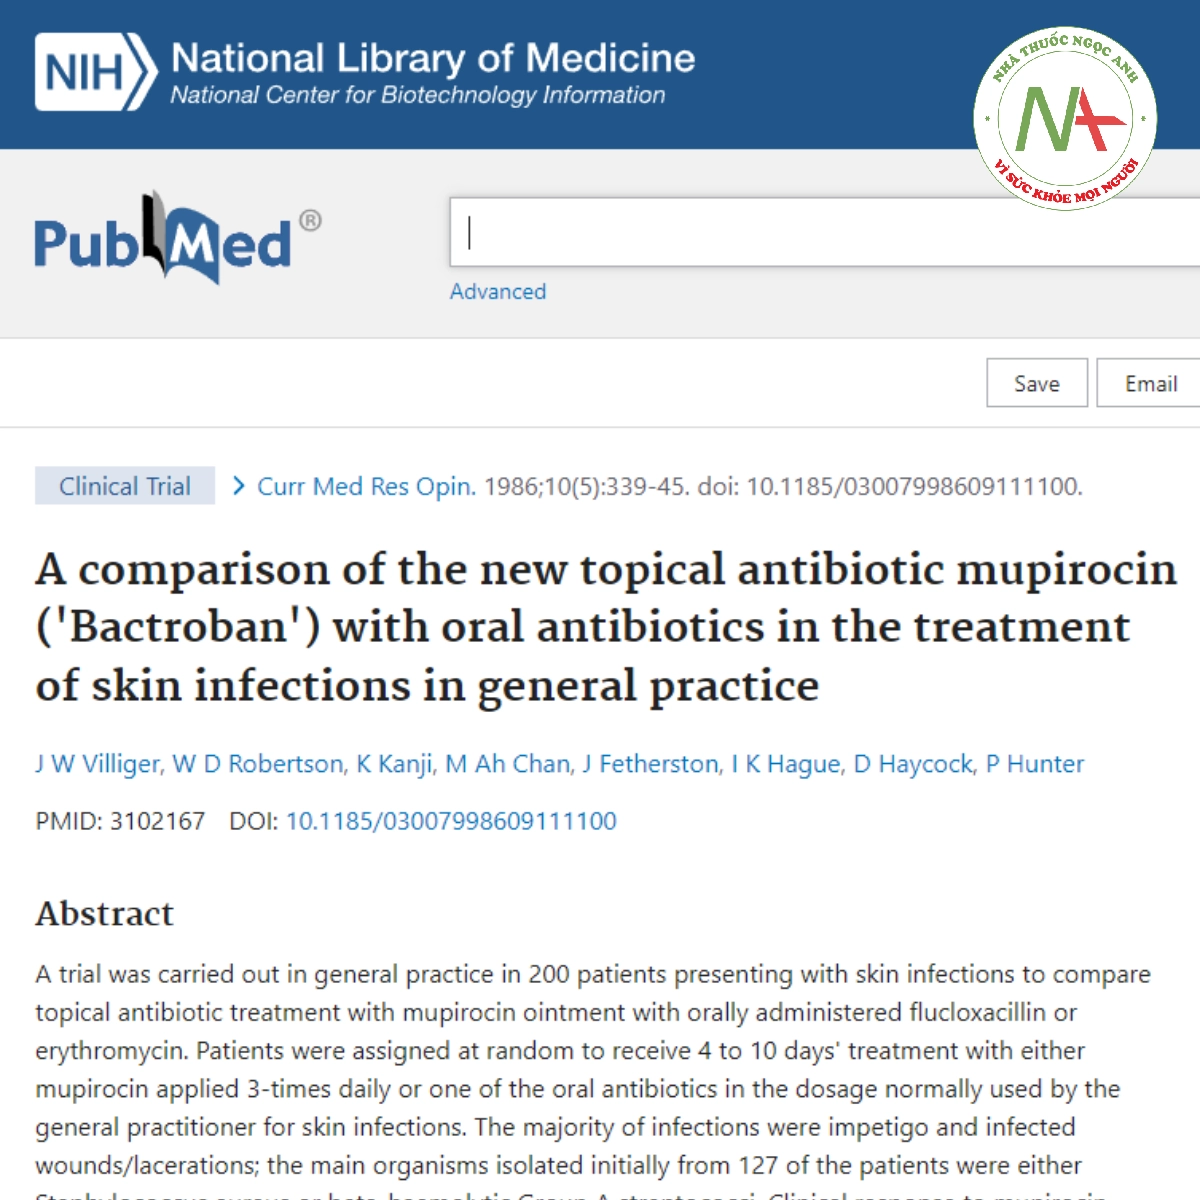 A comparison of the new topical antibiotic mupirocin ('Bactroban') with oral antibiotics in the treatment of skin infections in general practice